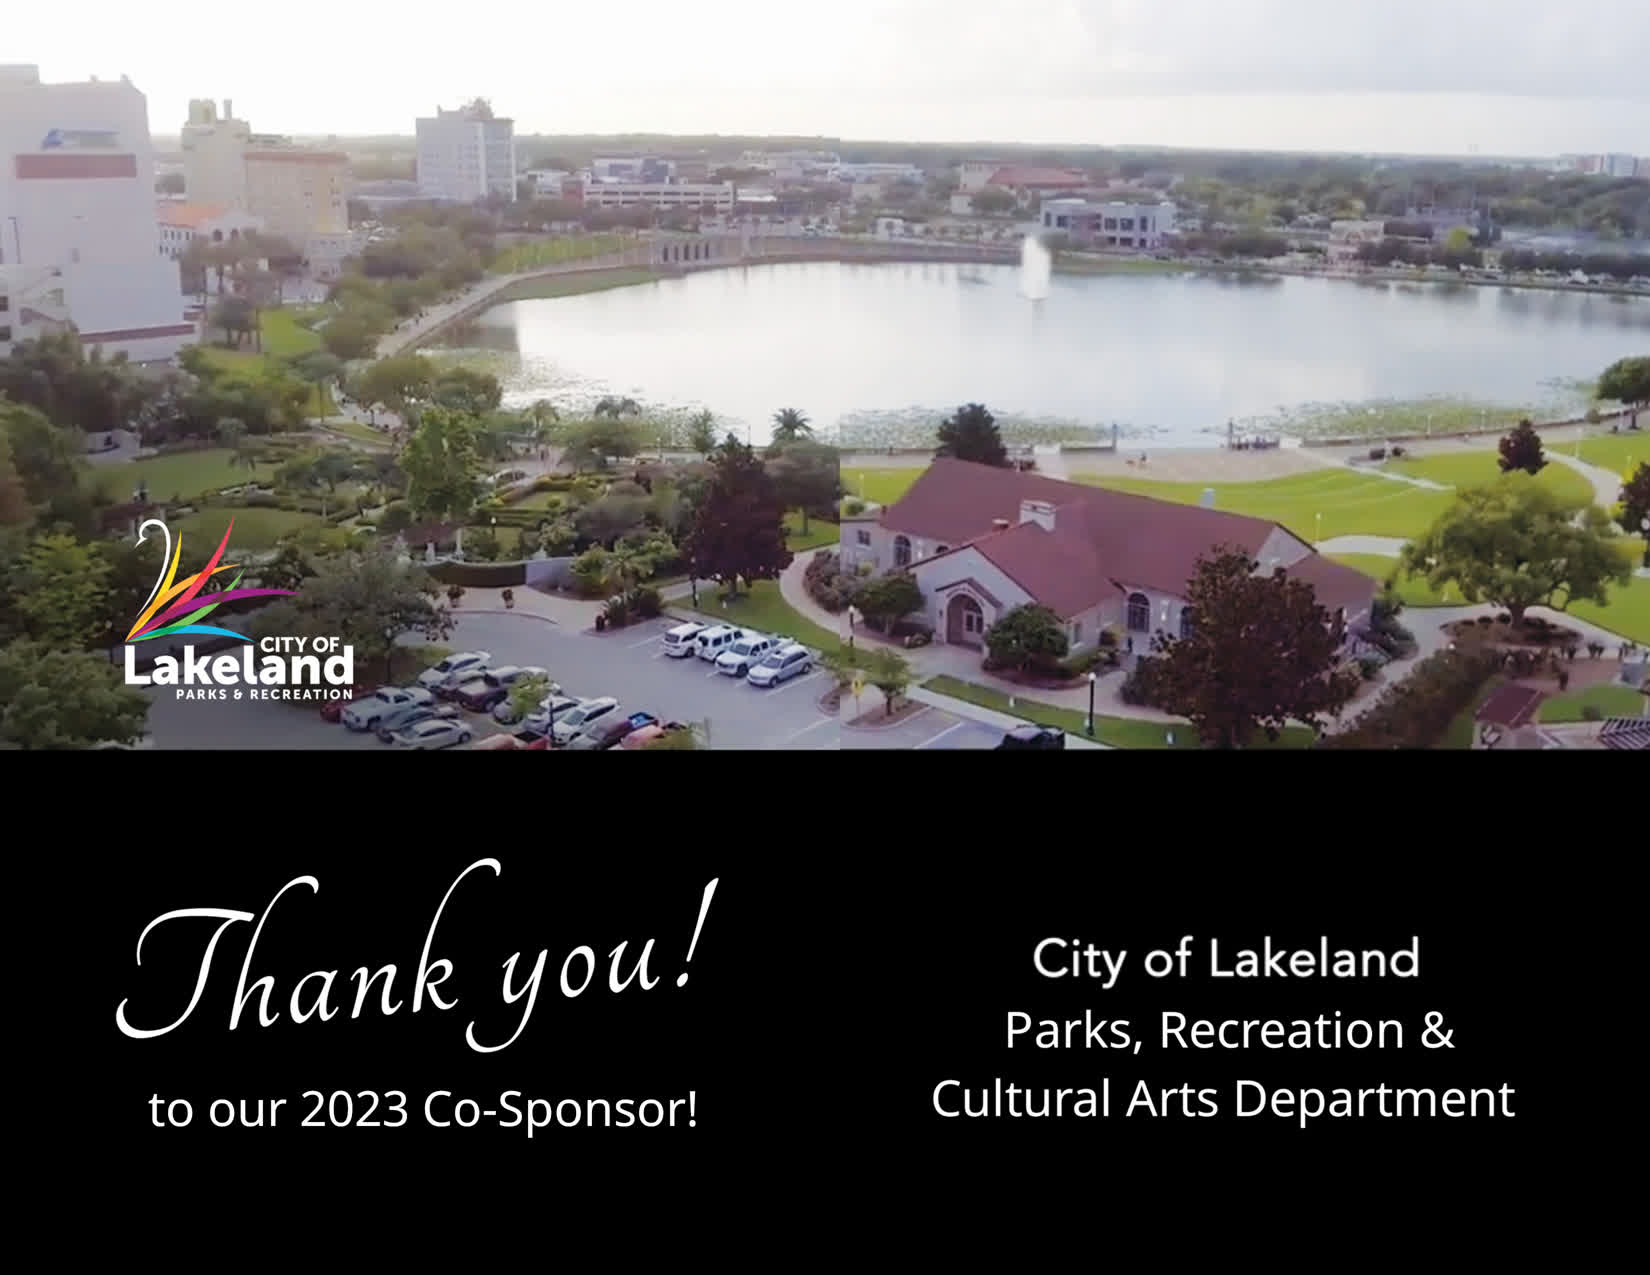 City of Lakeland Department Parks, Recreation and Cultural Arts